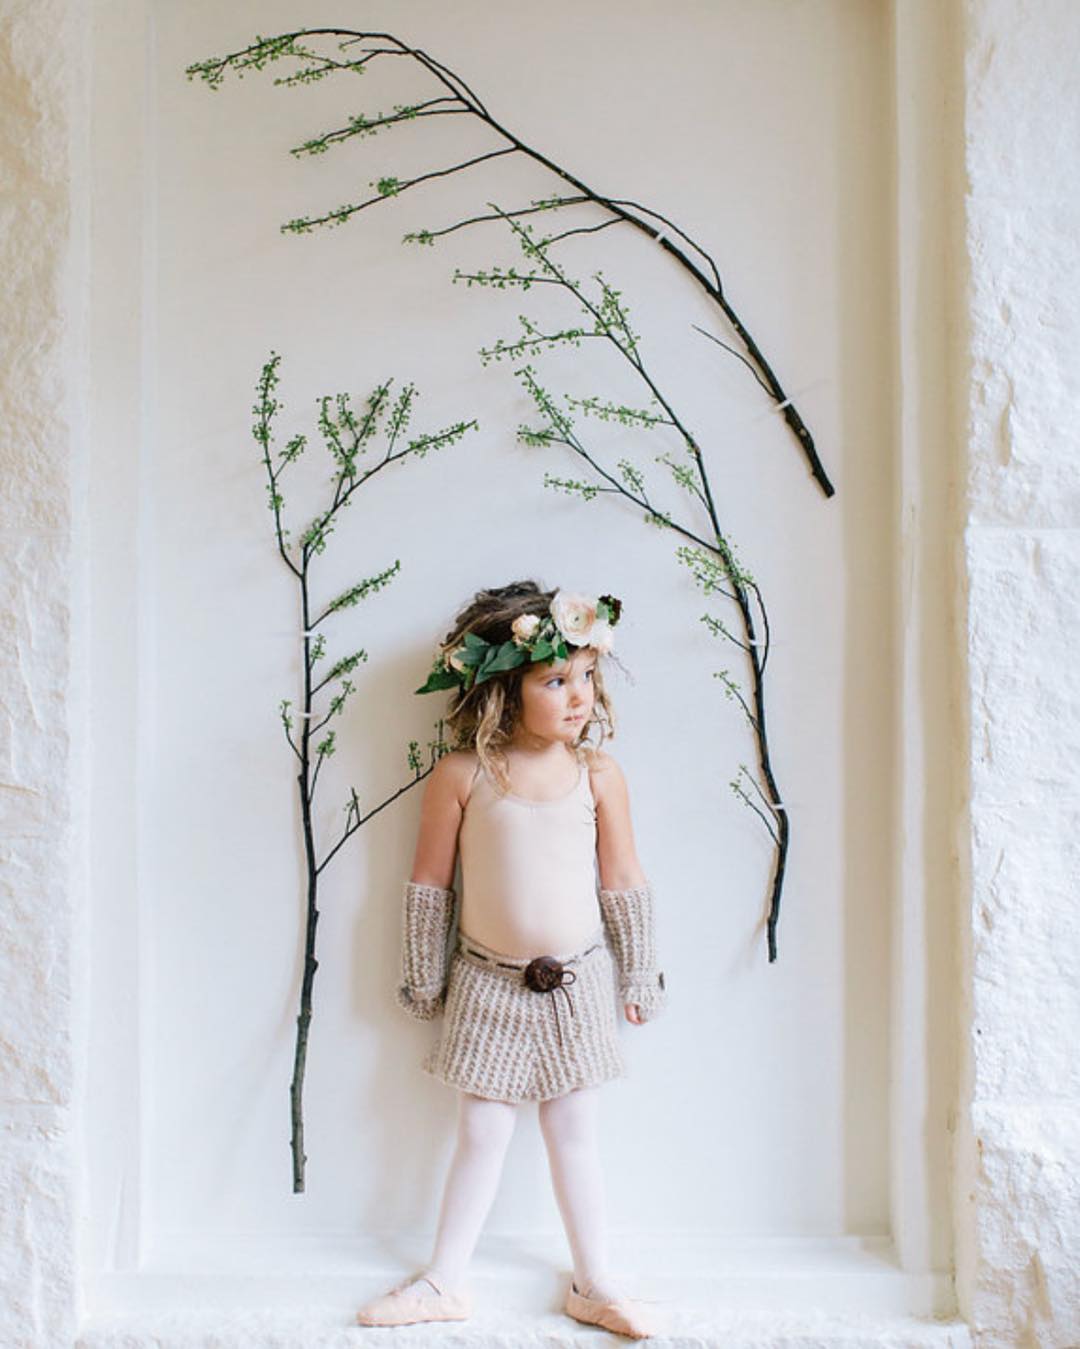 I’m so in love with this image & what people do not know is that our model Patience did not last up there long after quickly getting her locks caught in the branches. So mad props to @kate_preftakes for capturing this gorgeousness with the quickness??
.
.
.
#ninjaskills #moneyshot #photoshoot #ecochic #flowergirl #cutie #crochet #minimalism #weddinginspo #dreadlocks #hippiebaby #babymodel #flowerchild #flowercrown